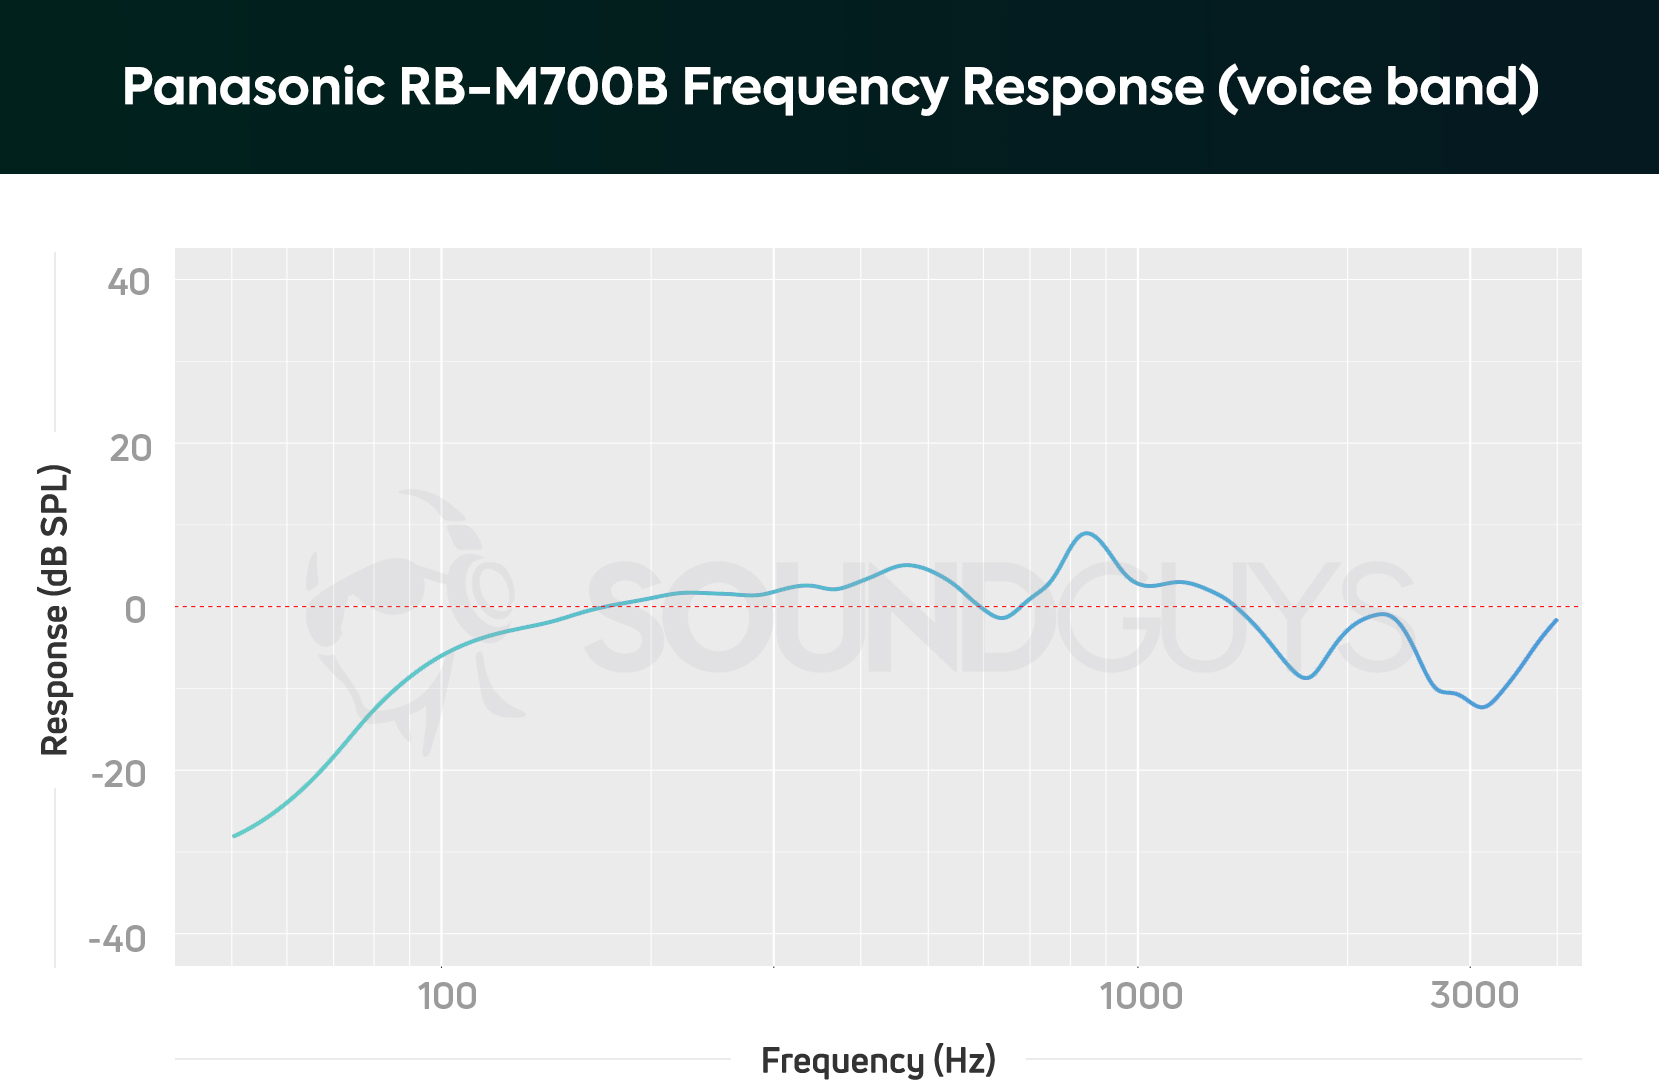 Panasonic RB-M700B microphone response graph showing a relatively flat response save for the lows